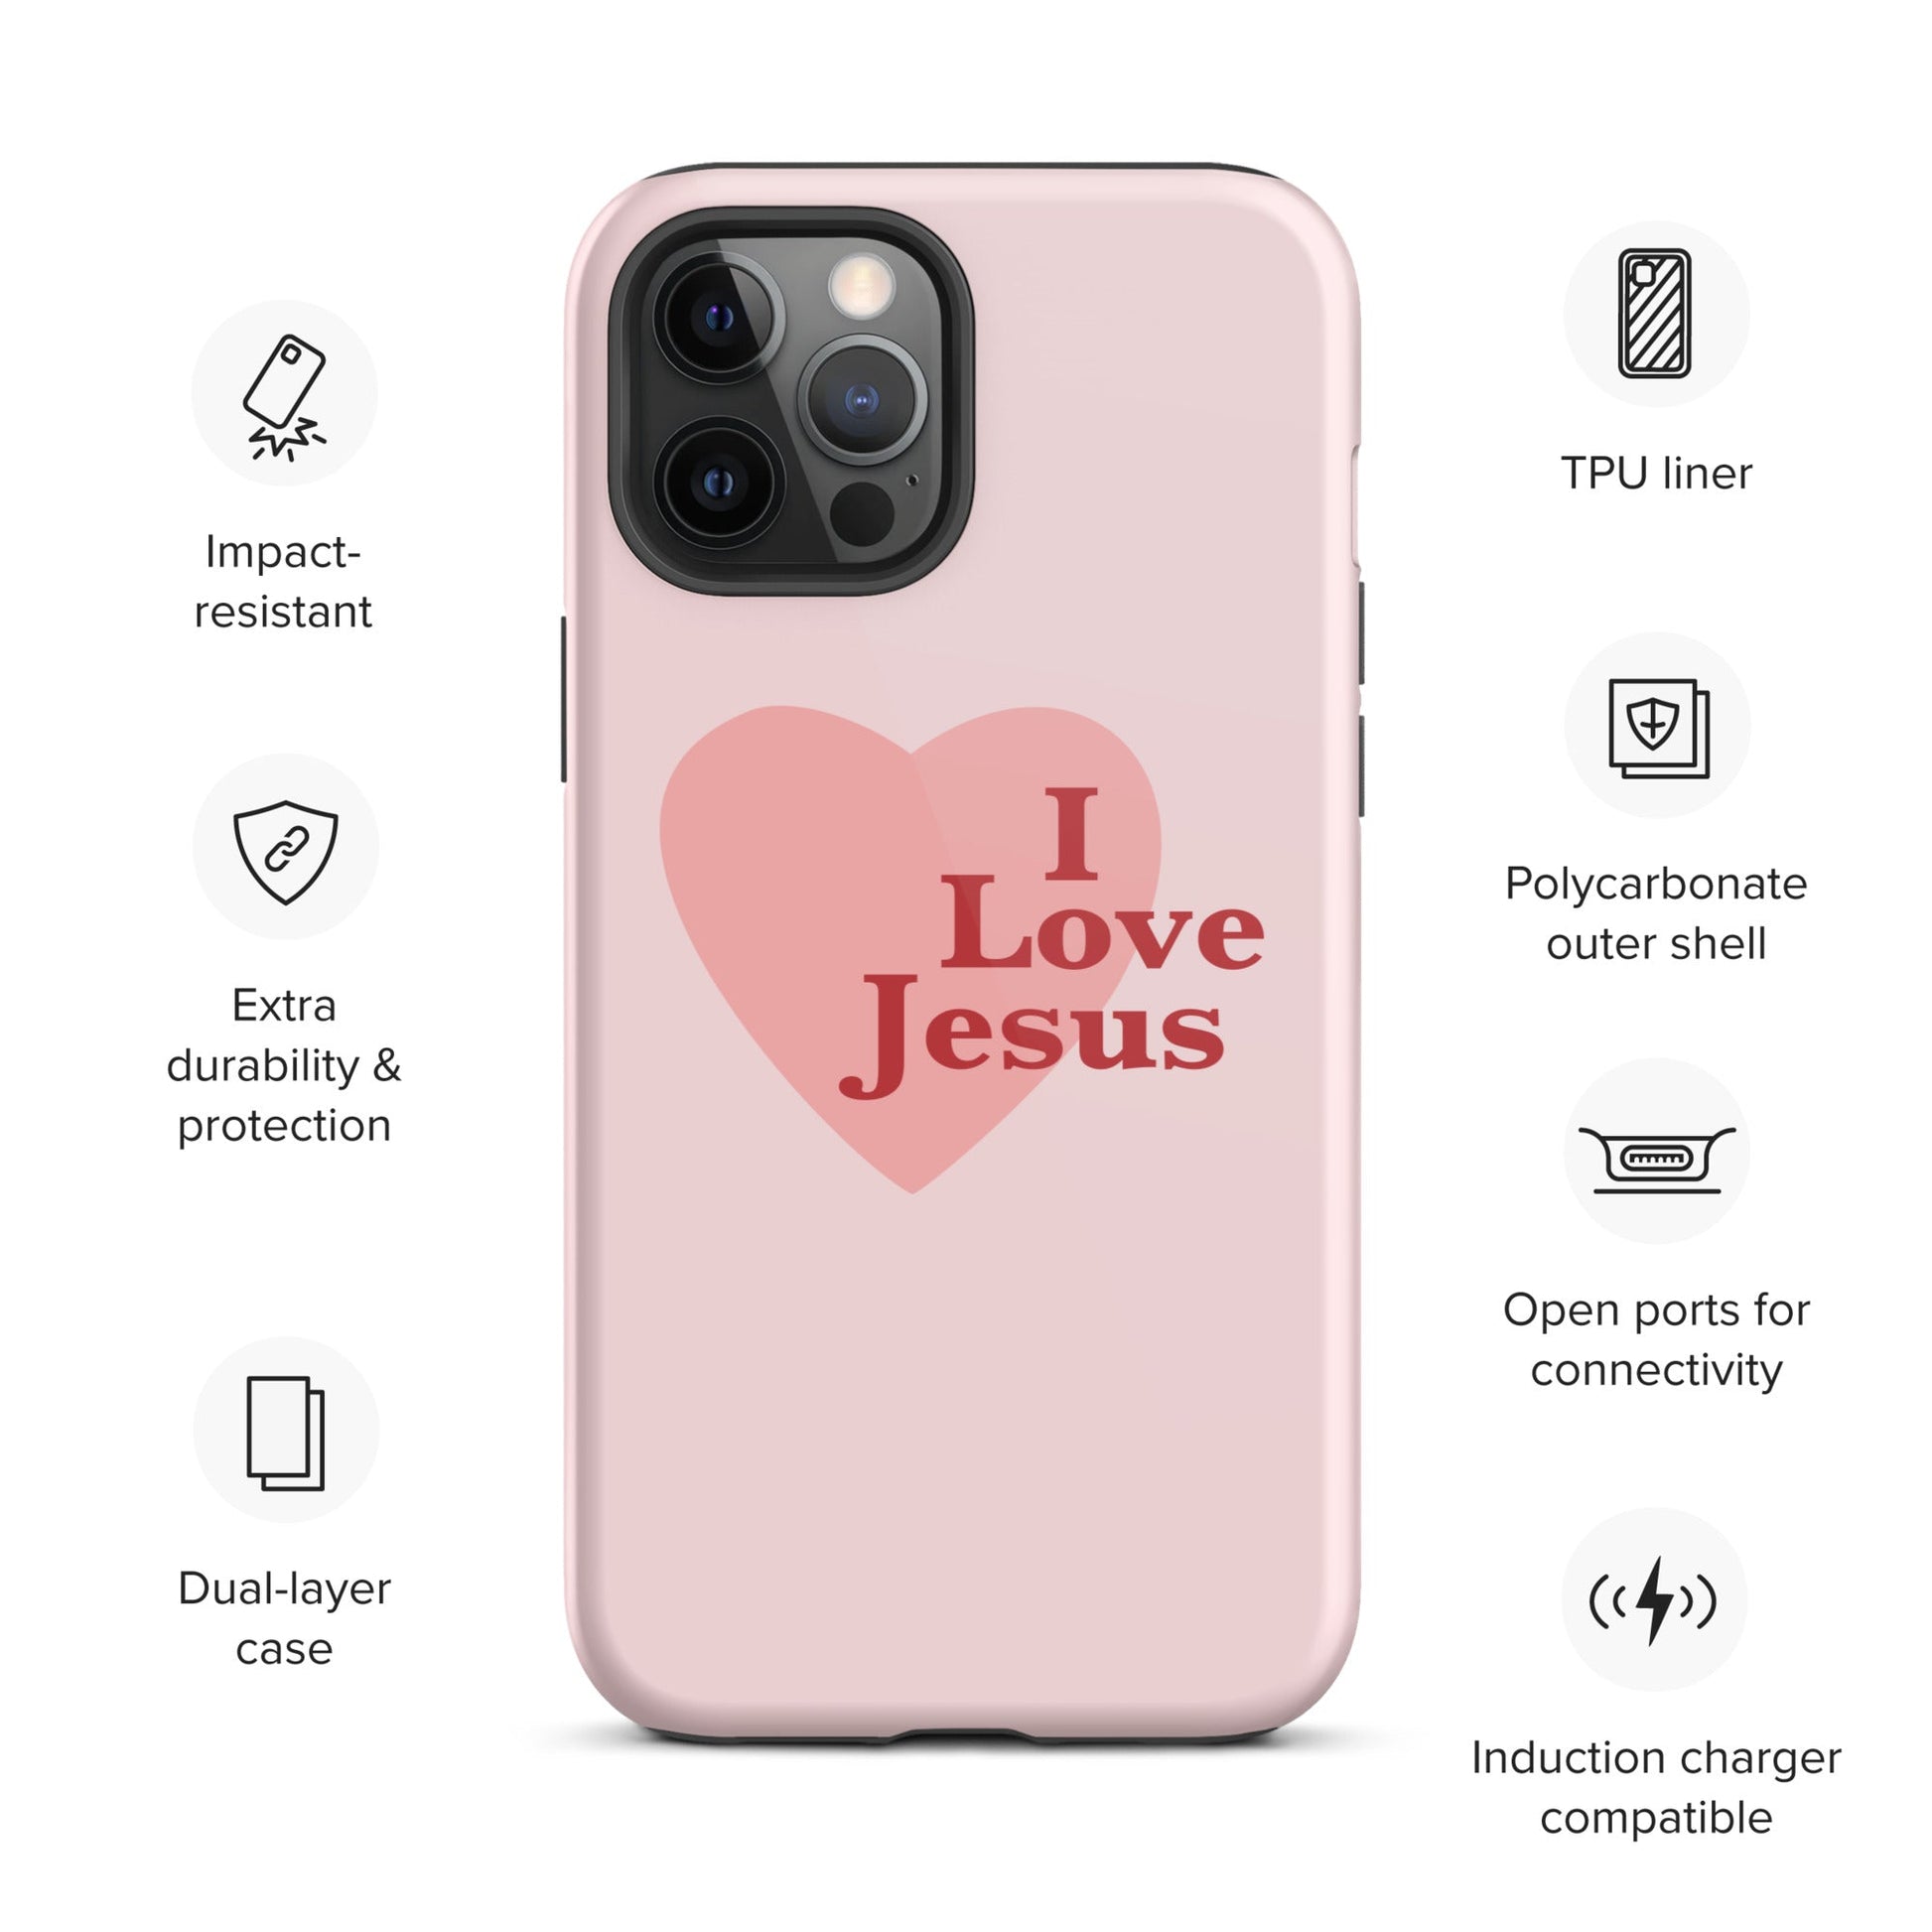 I Love Jesus - Pink - Tough iPhone case for iPhone 11 Pro Max & Mini, 12 Pro Max & Mini, 13 Pro Max & Mini, 14 Pro Max & Mini - Creation Awaits